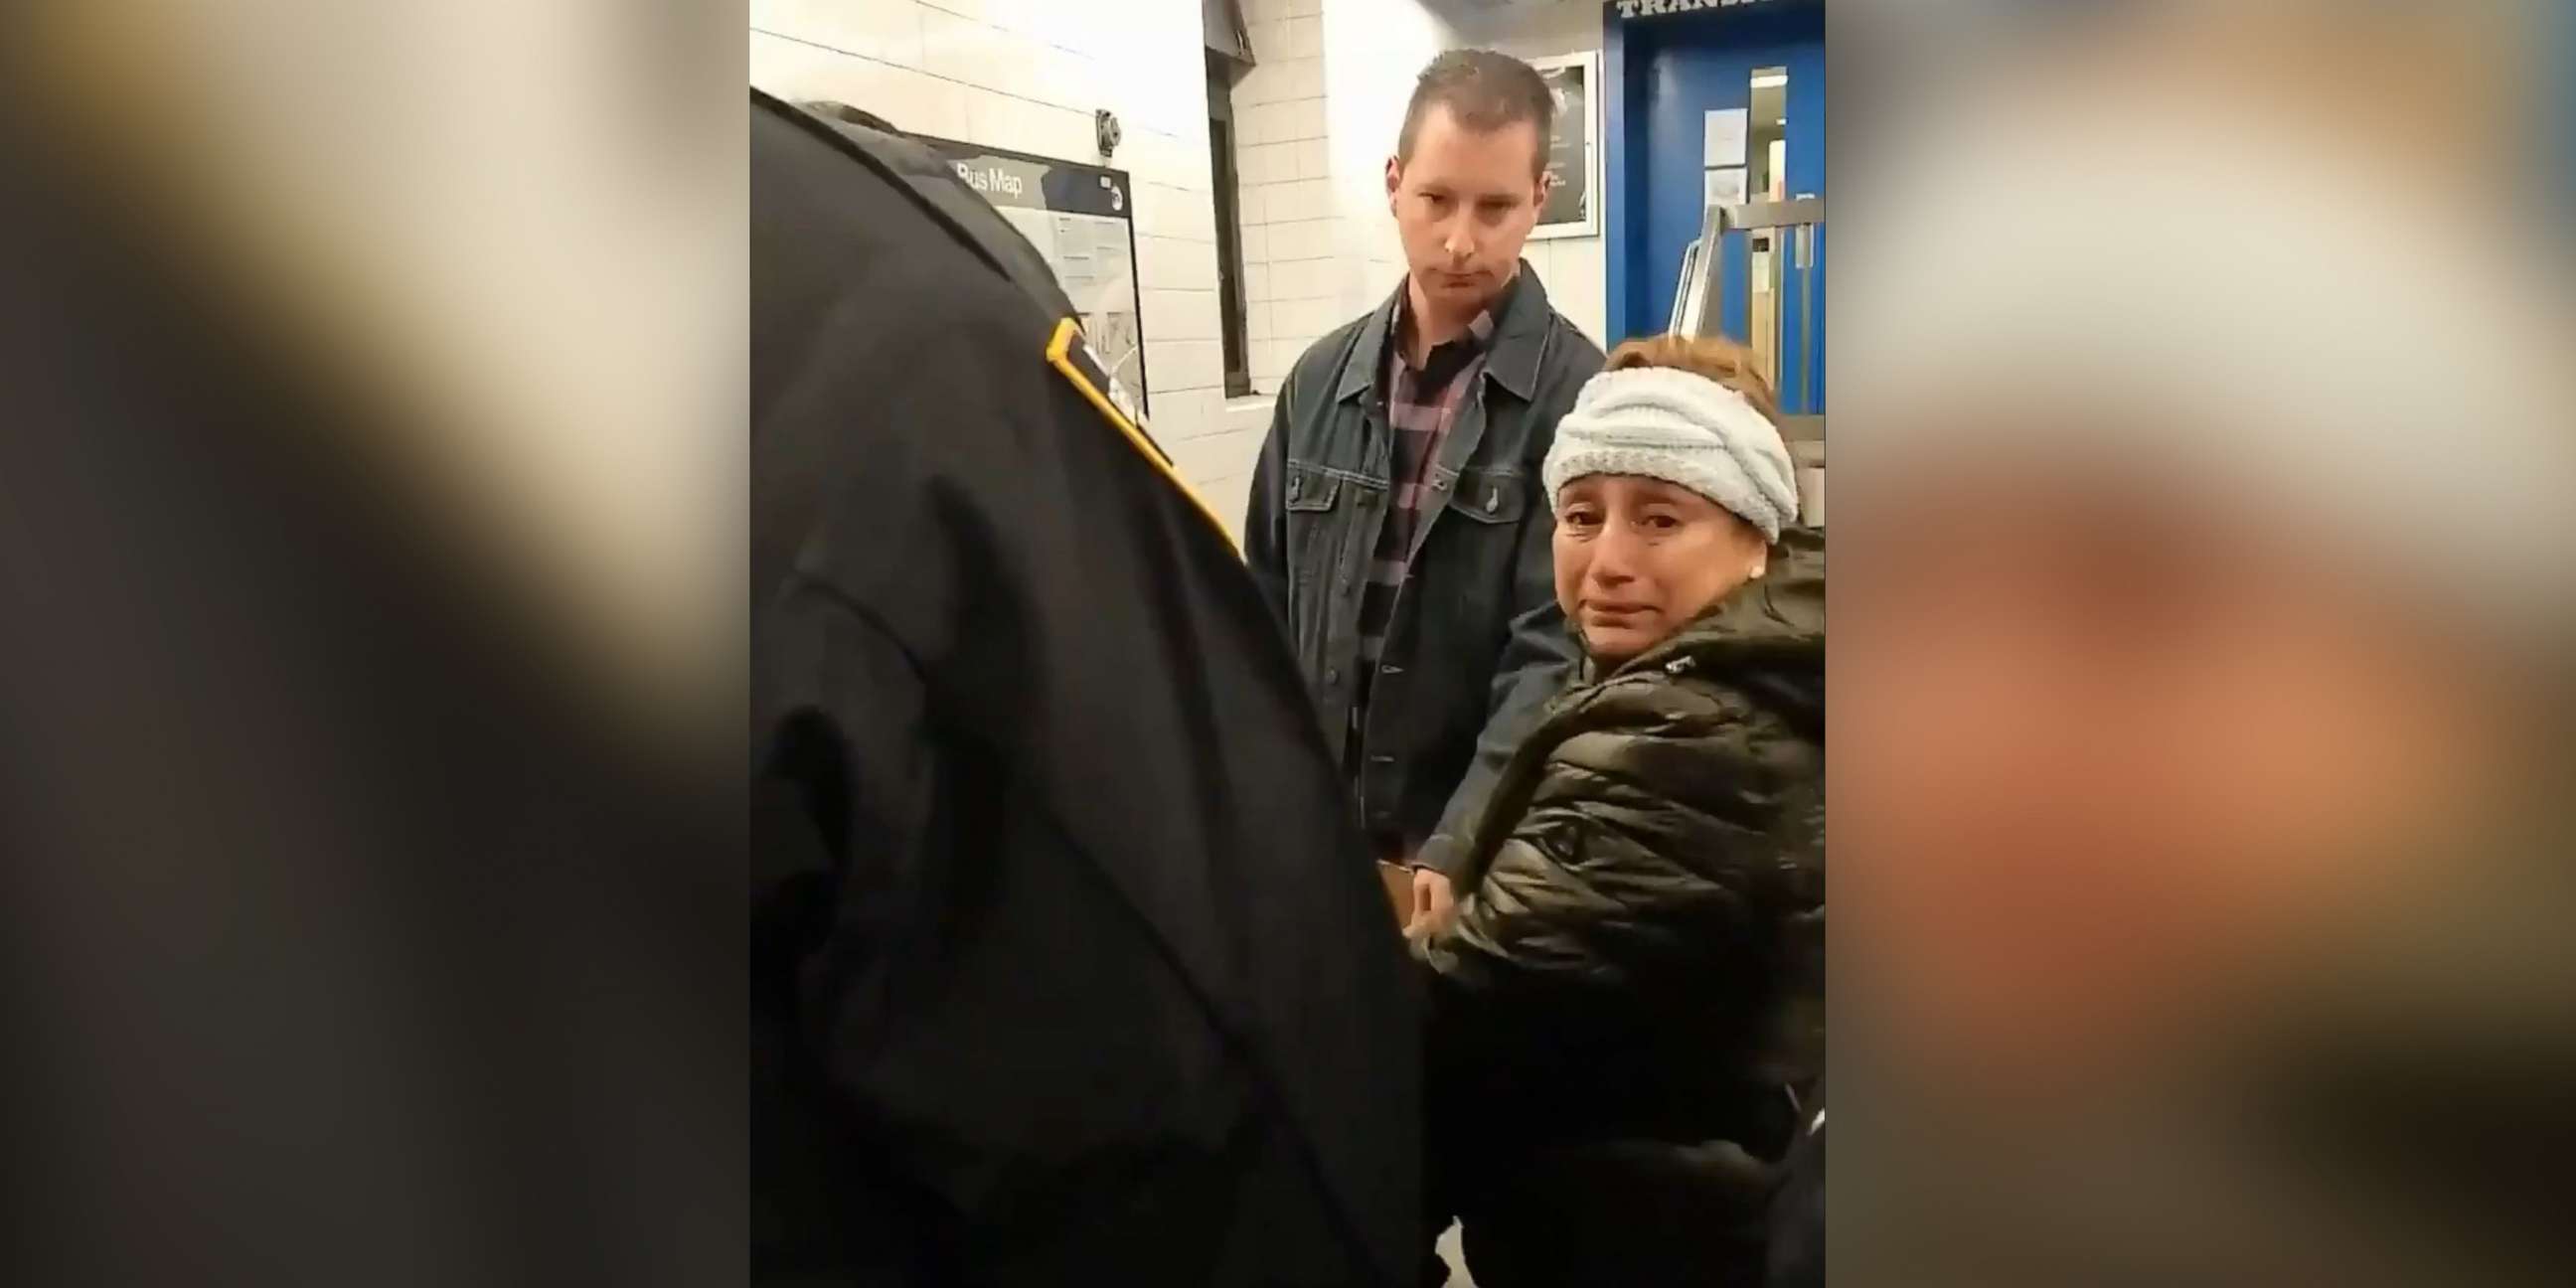 PHOTO: Police handcuff woman selling churros in Brooklyn subway station in New York, Nov. 9, 2019.